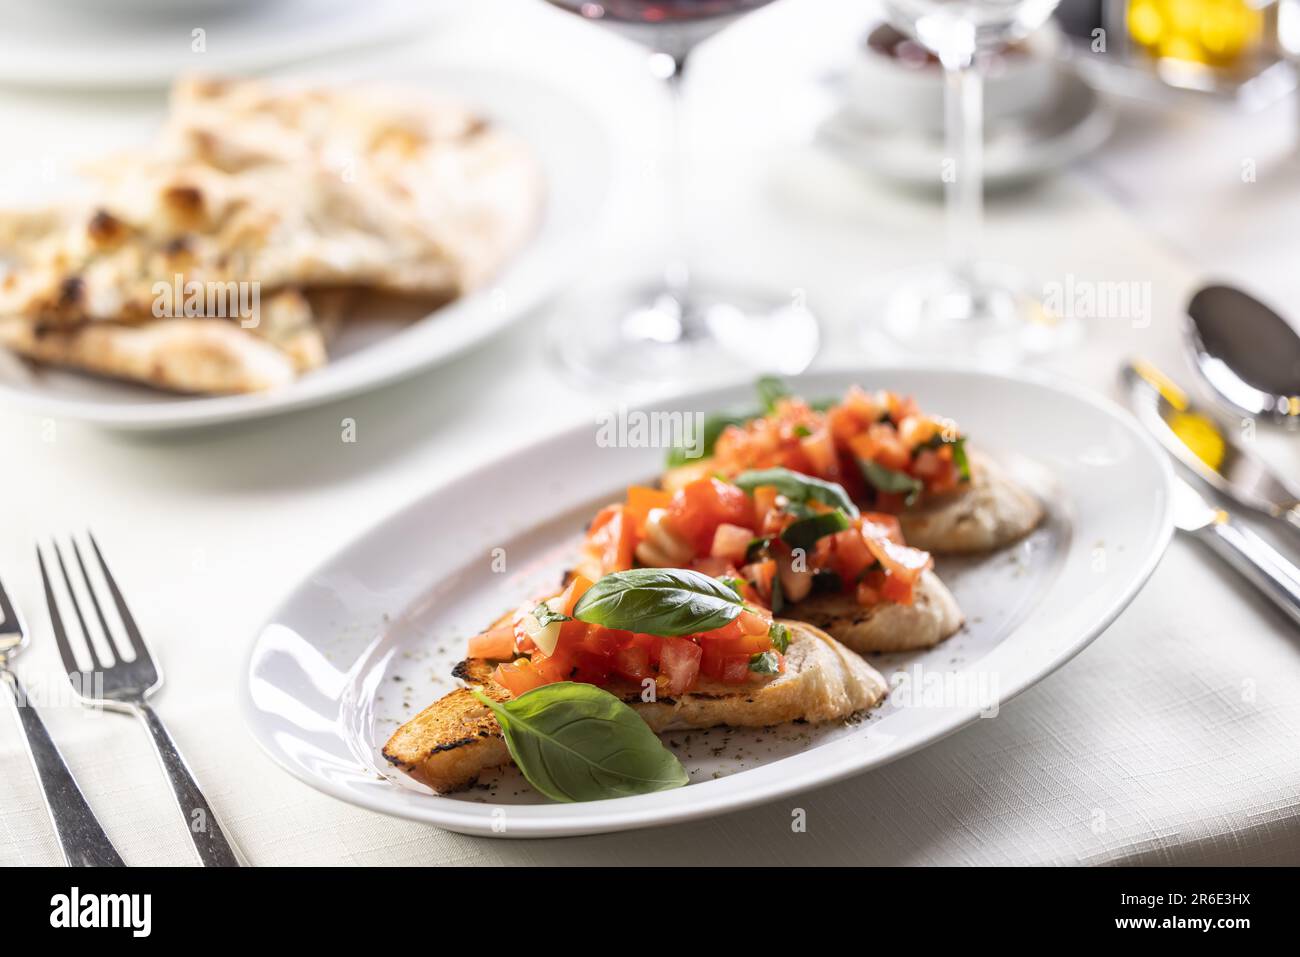 Italian appetizer with three bruschettas topped with tomatoes and greens in a cafeteria. Stock Photo